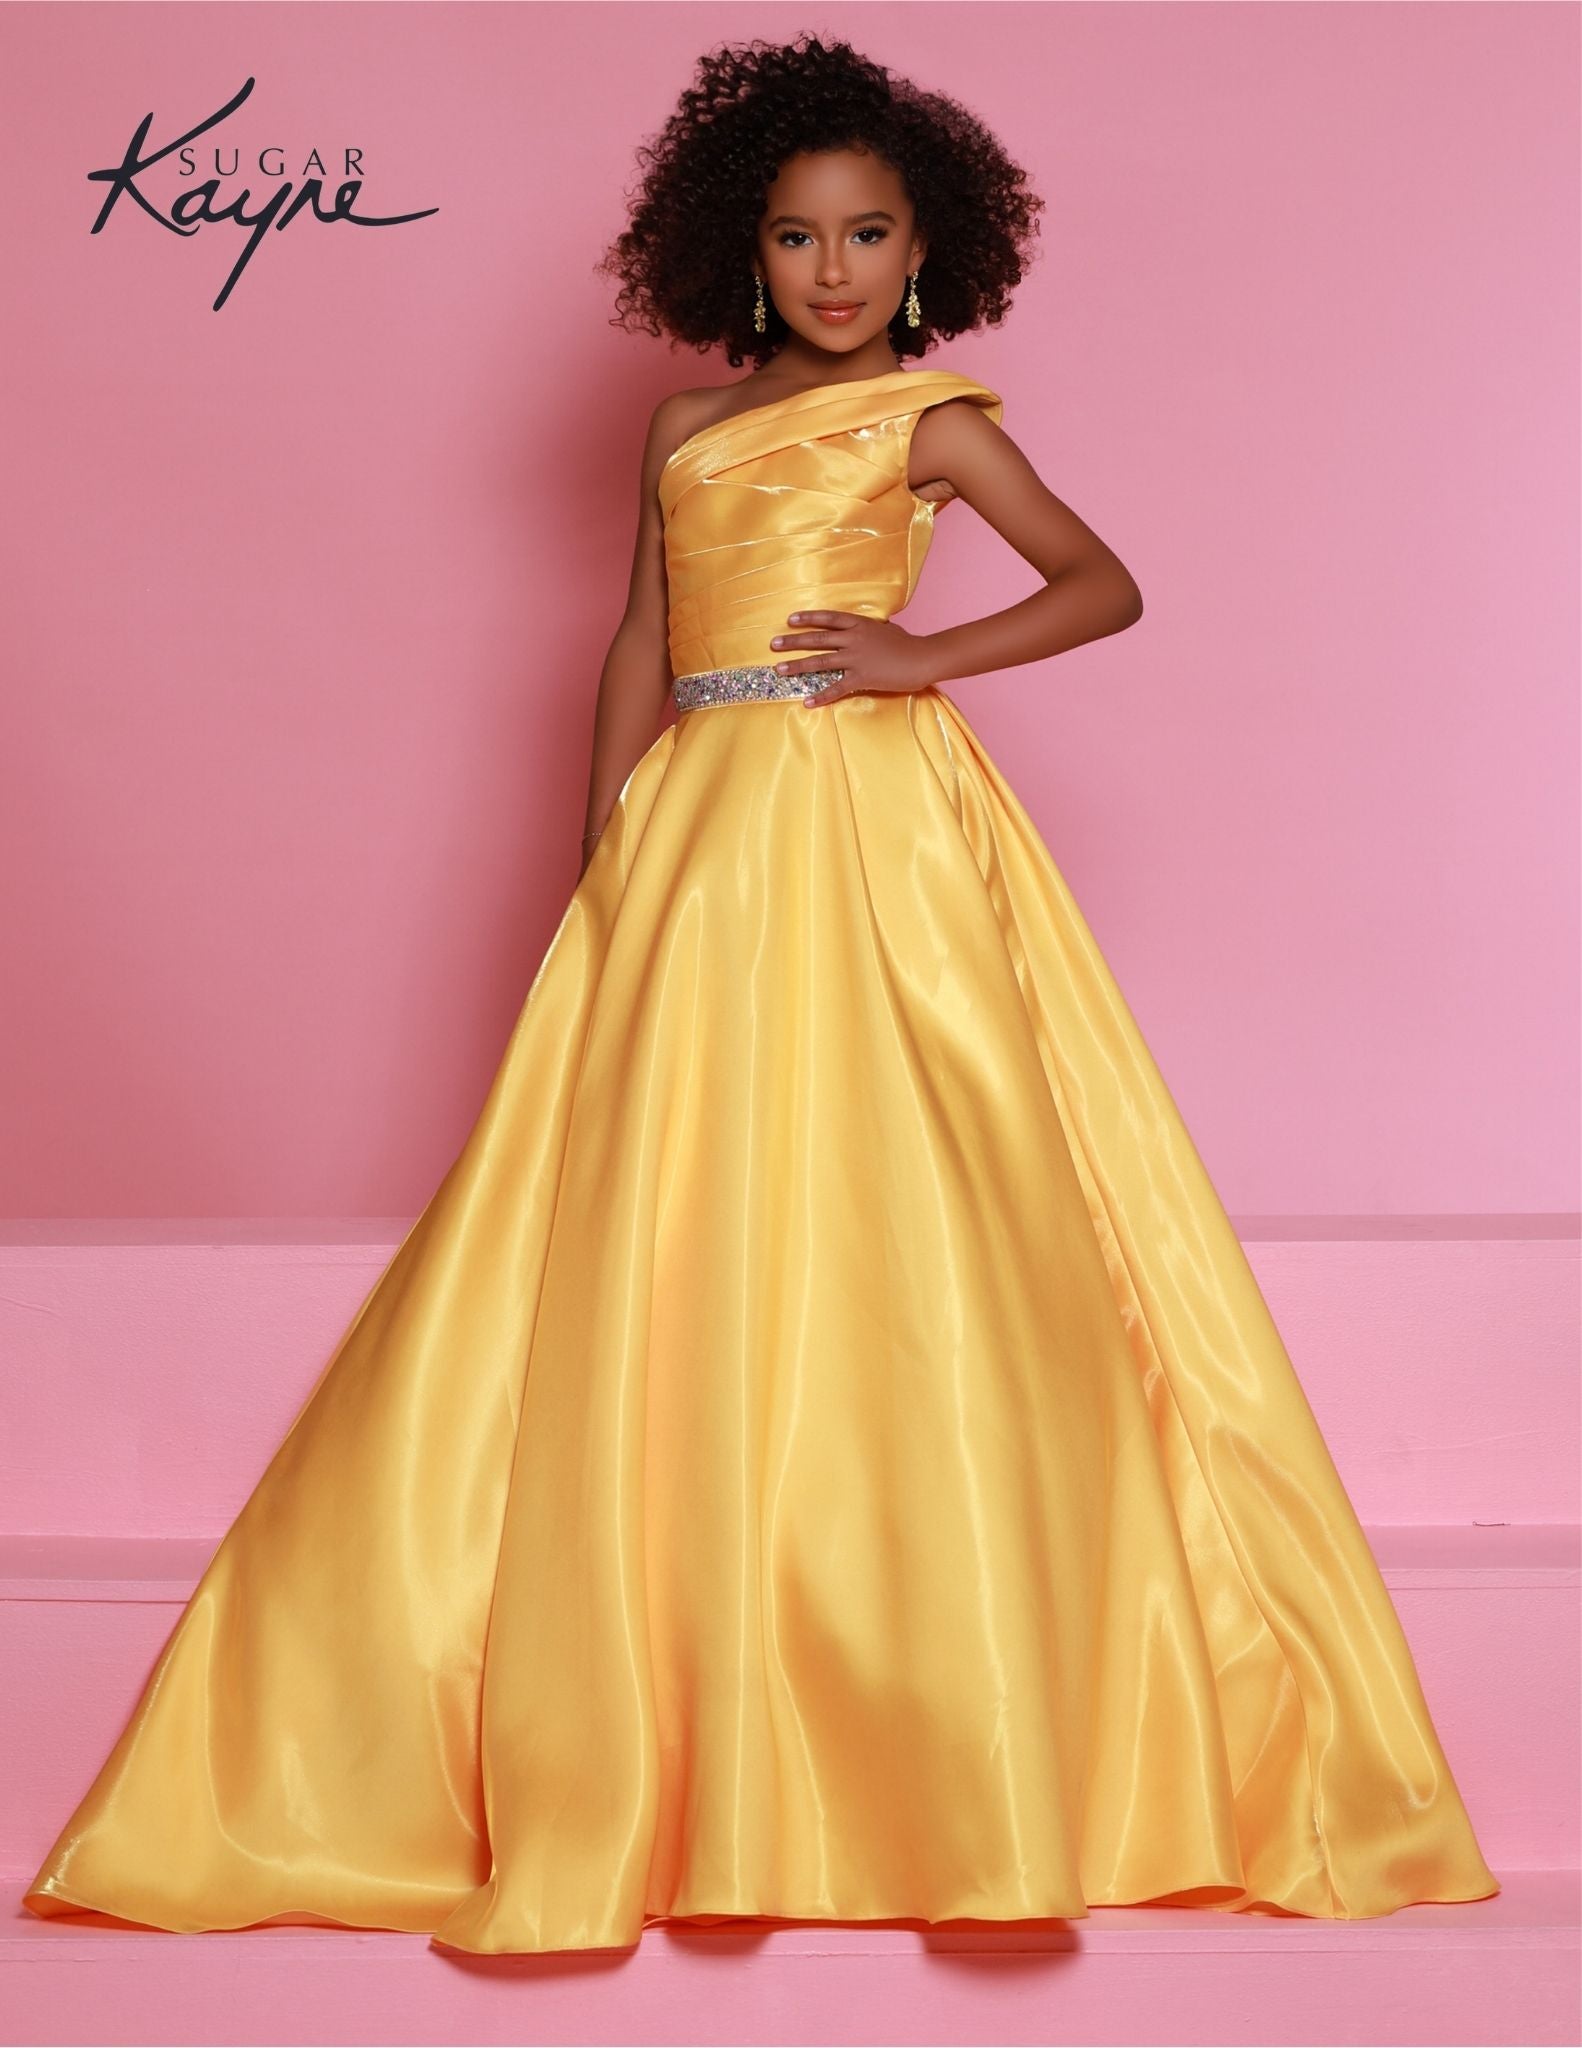 Sugar Kayne C312 Marigold Yellow Girls and Preteens Satin Pageant Dress Long A Line One Shoulder Formal Gown Gathered Bodice